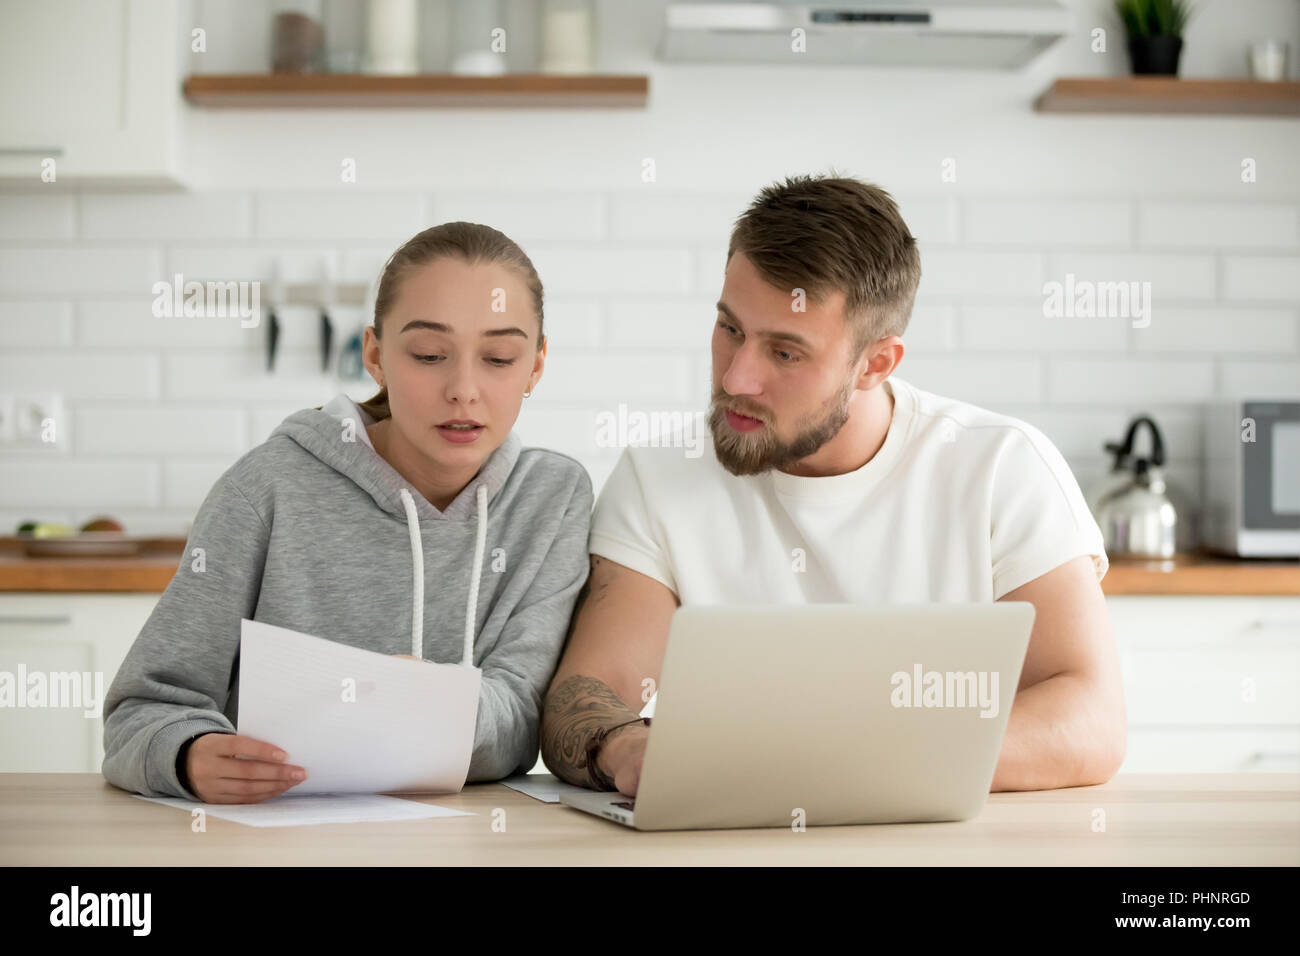 Serious couple analyzing budget or utility bills at home Stock Photo